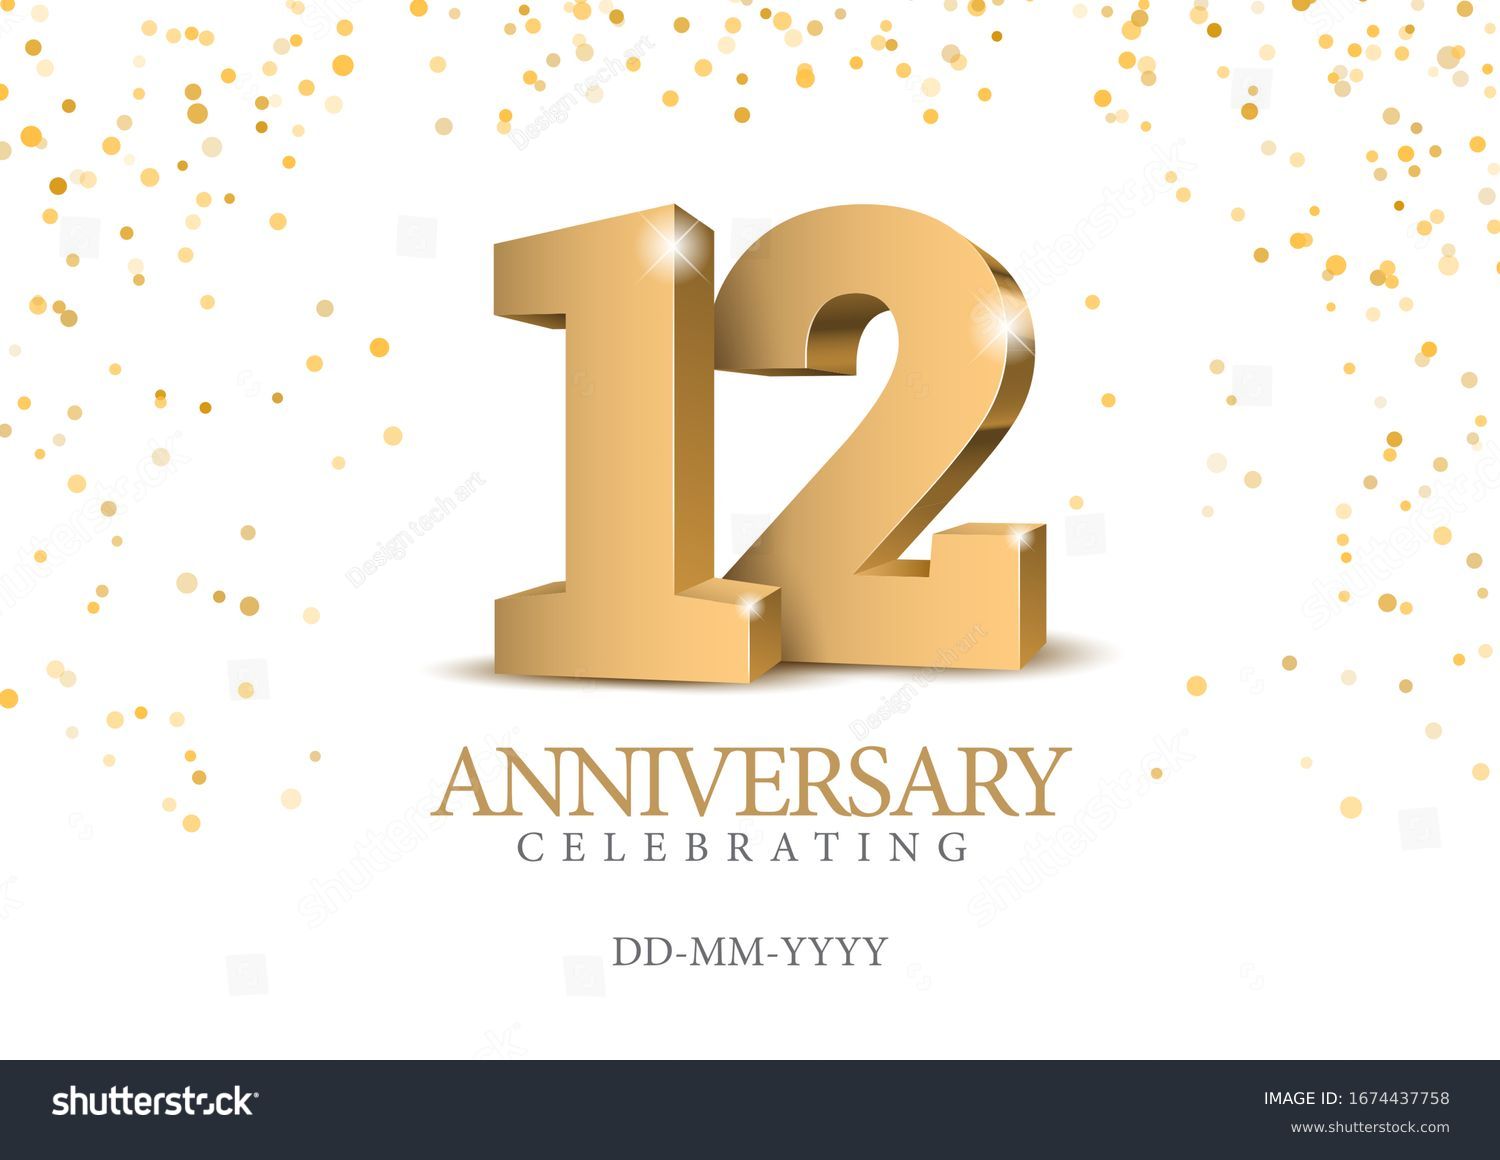 SVG of Anniversary 12. gold 3d numbers. Poster template for Celebrating 12th anniversary event party. Vector illustration svg